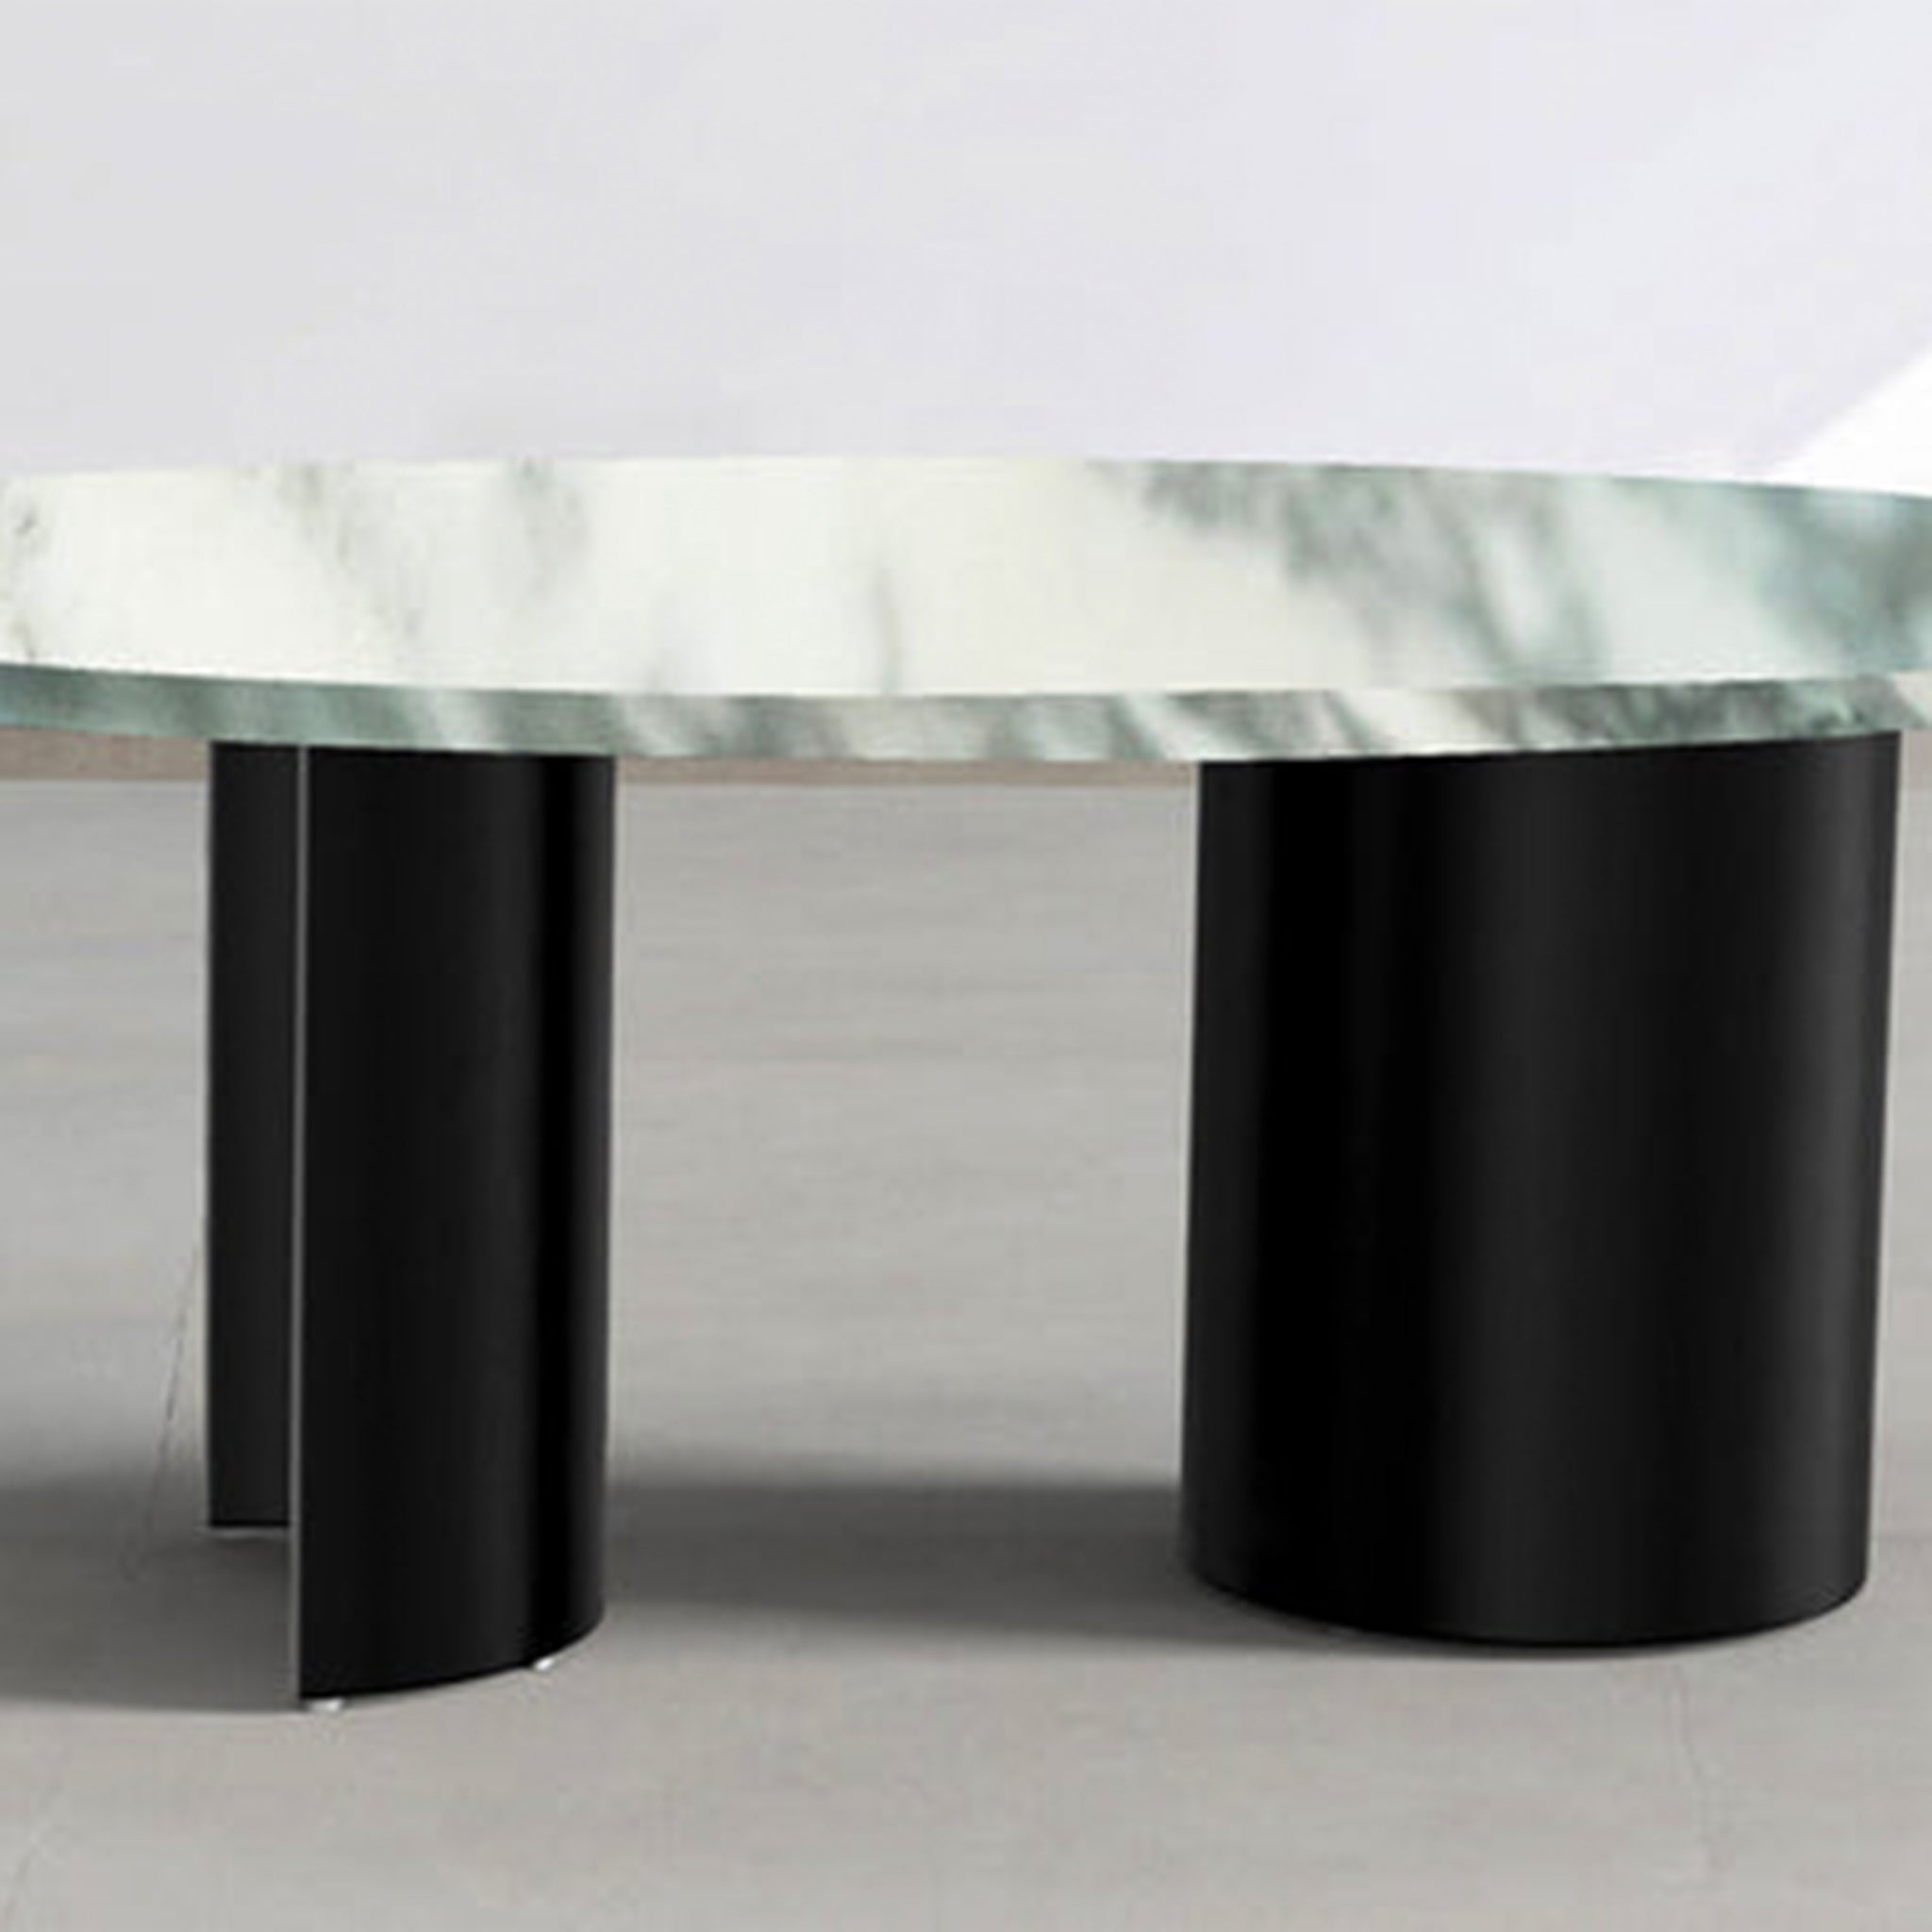 Living Room Decor: Add a touch of elegance with this round marble coffee table.